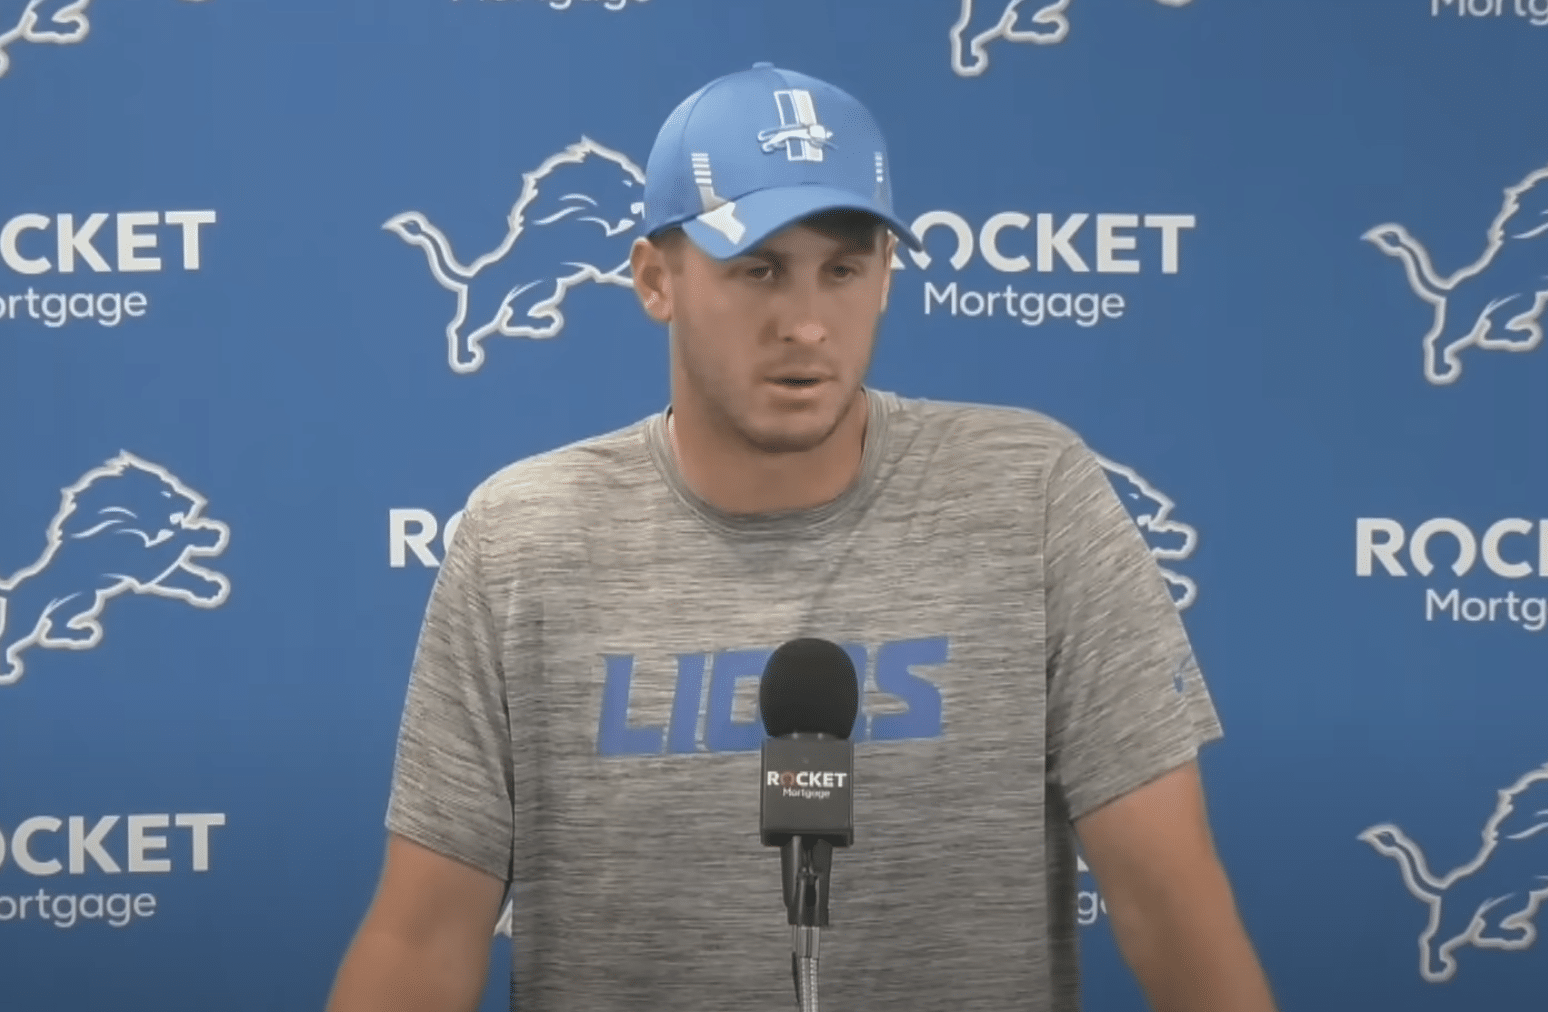 Detroit Lions are built for games Jared Goff